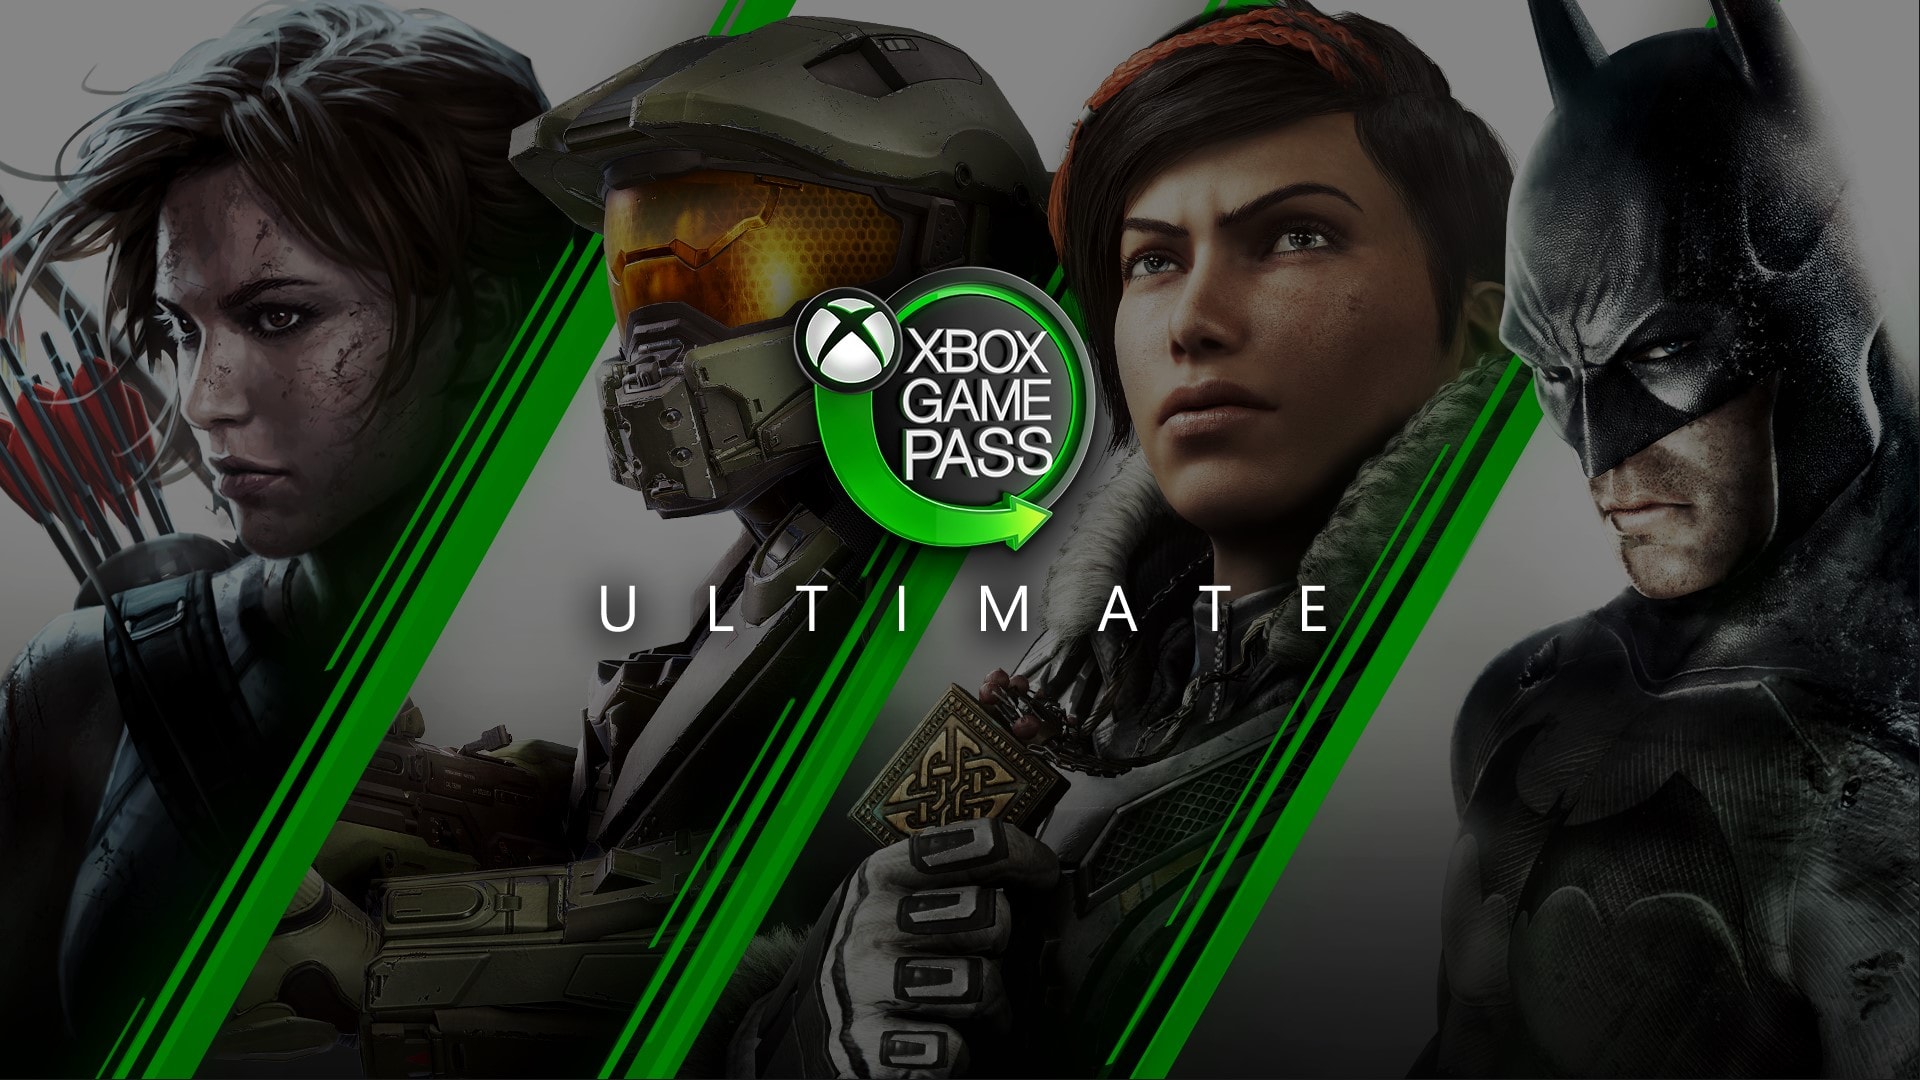 PSA: Upgrade 3 years of Xbox Live to Game Pass Ultimate for just $1 | Ars Technica